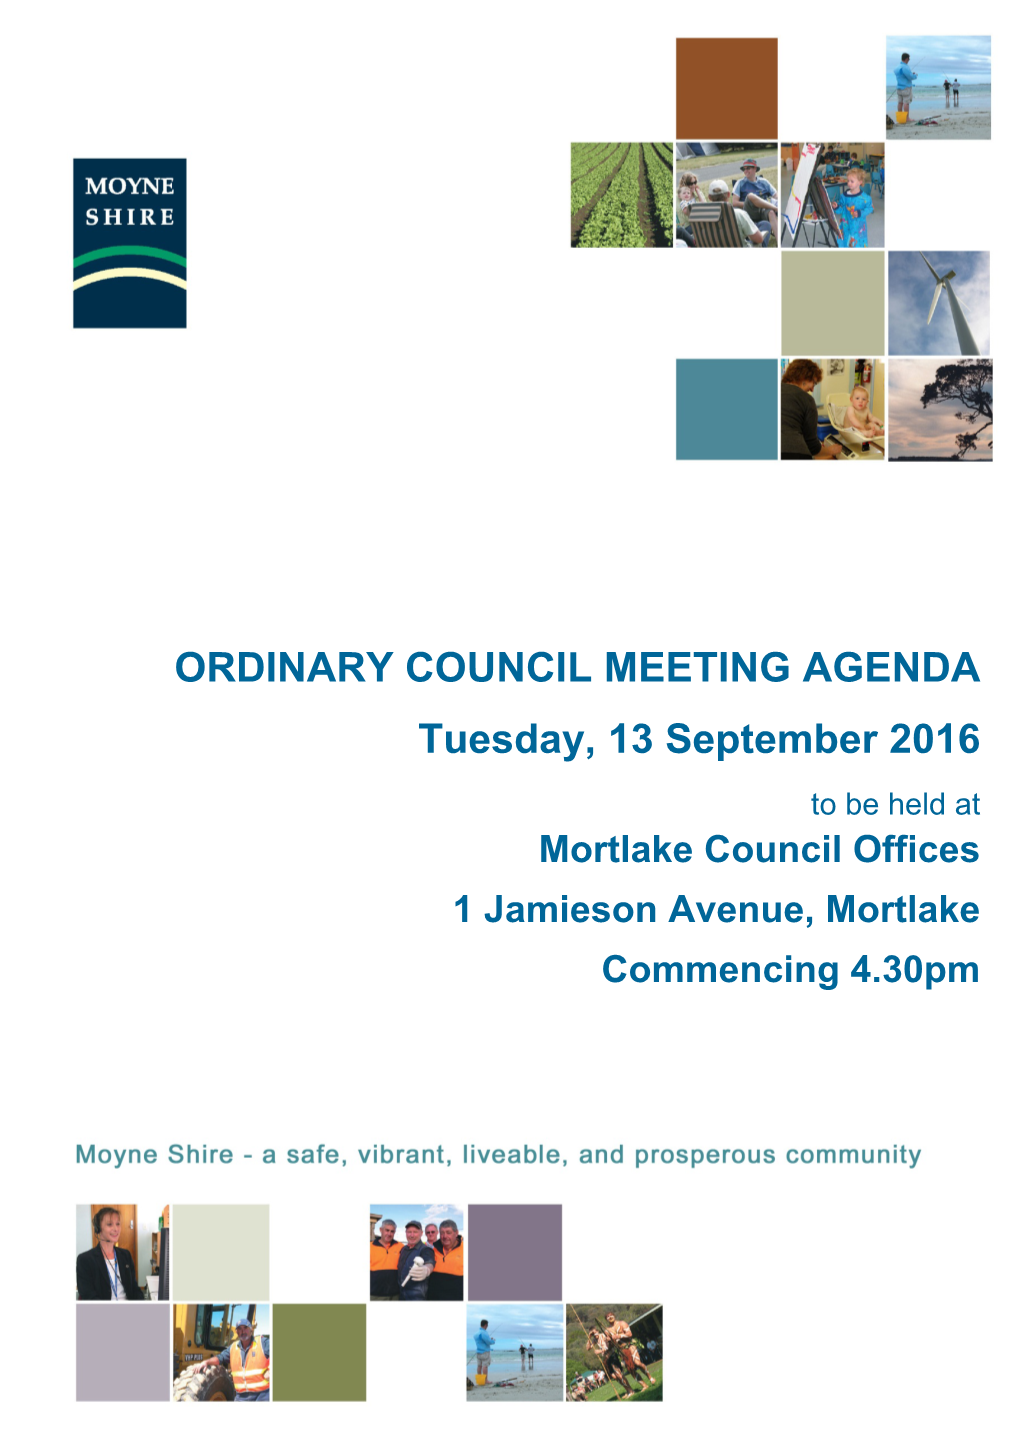 ORDINARY COUNCIL MEETING AGENDA Tuesday, 13 September 2016 to Be Held at Mortlake Council Offices 1 Jamieson Avenue, Mortlake Commencing 4.30Pm